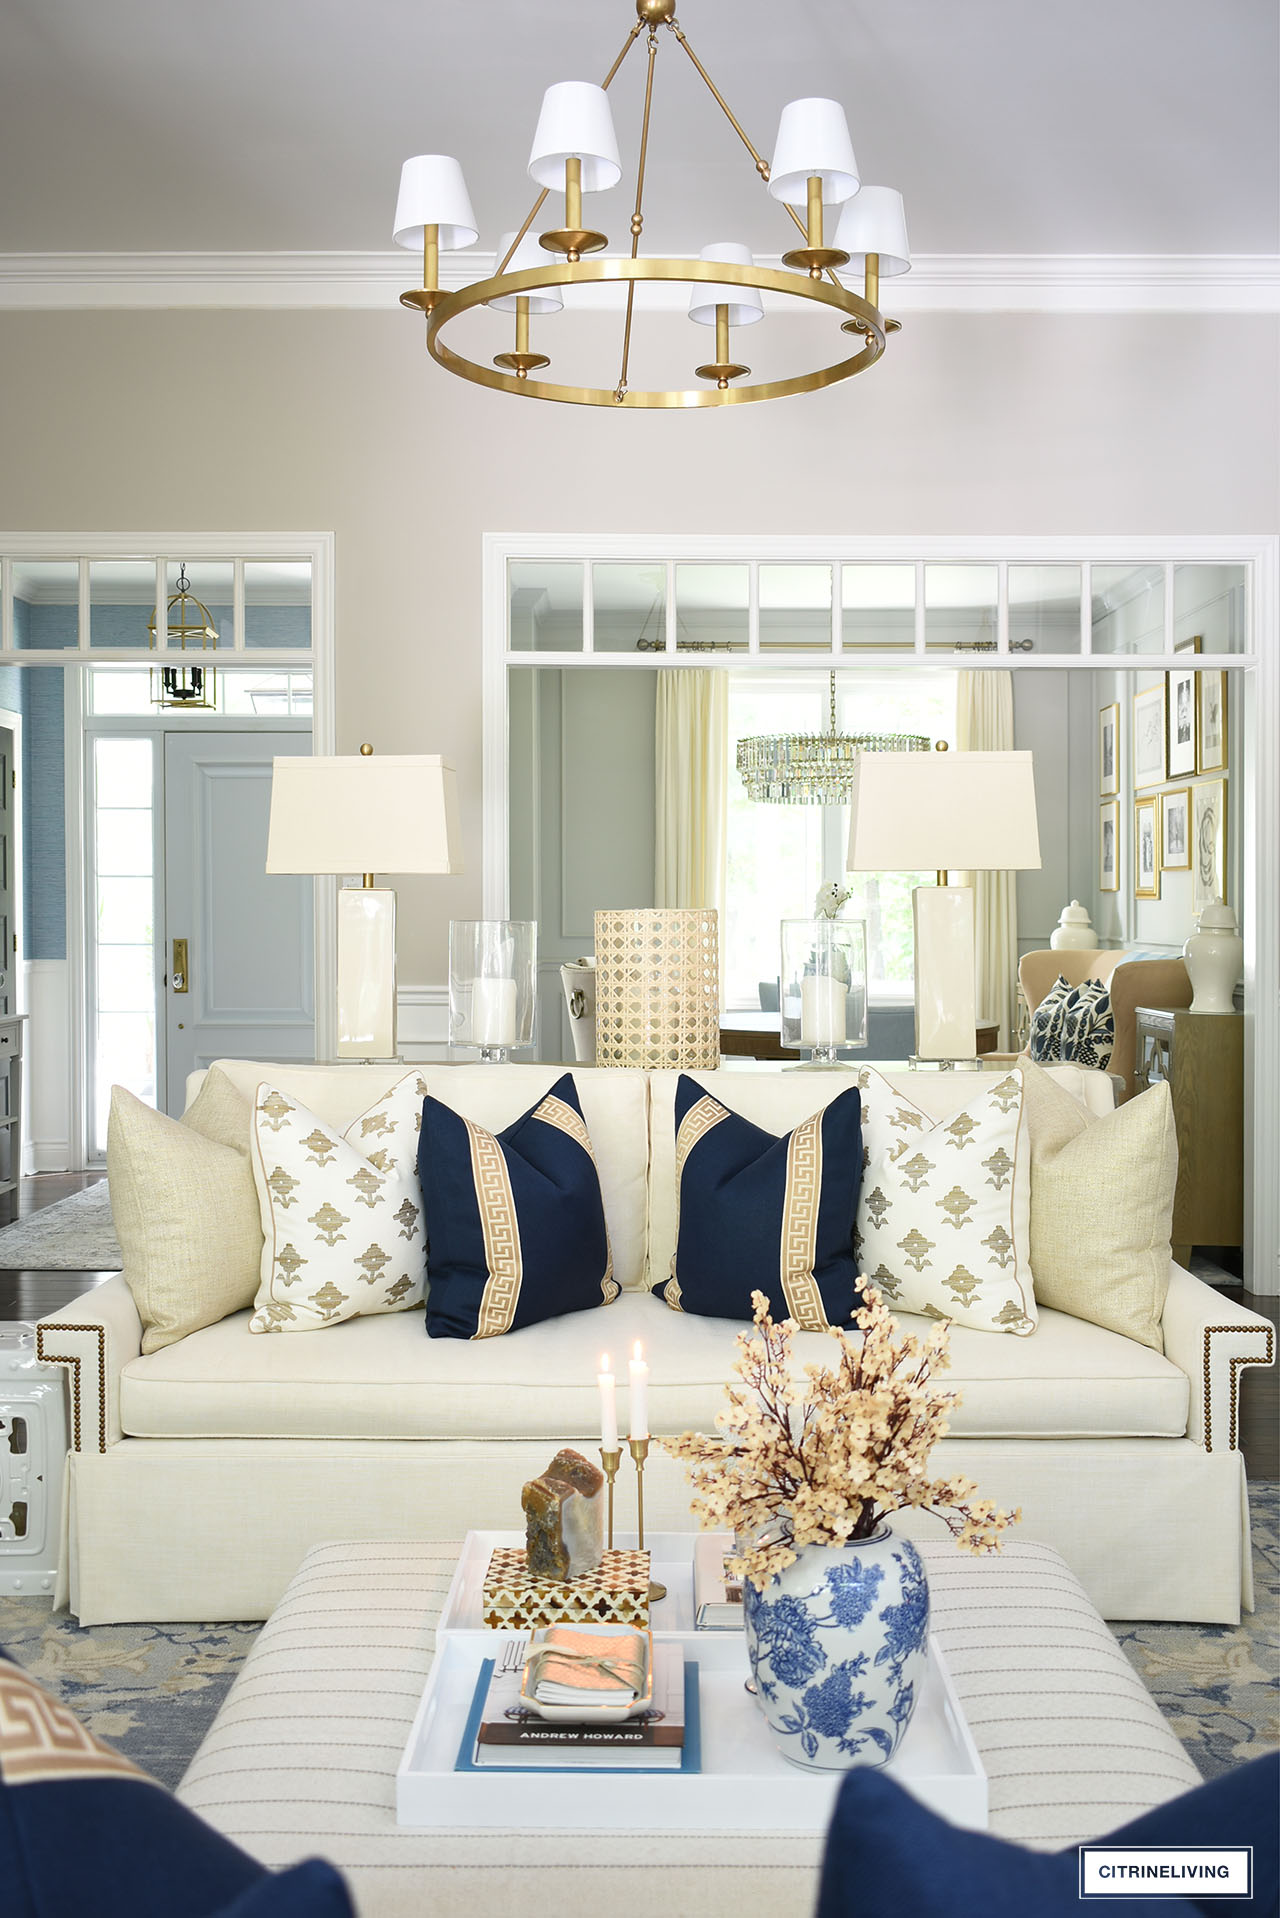 Chic and elegant fall decor layered with navy, tan and gold pillows for a cozy but sophisticated look.